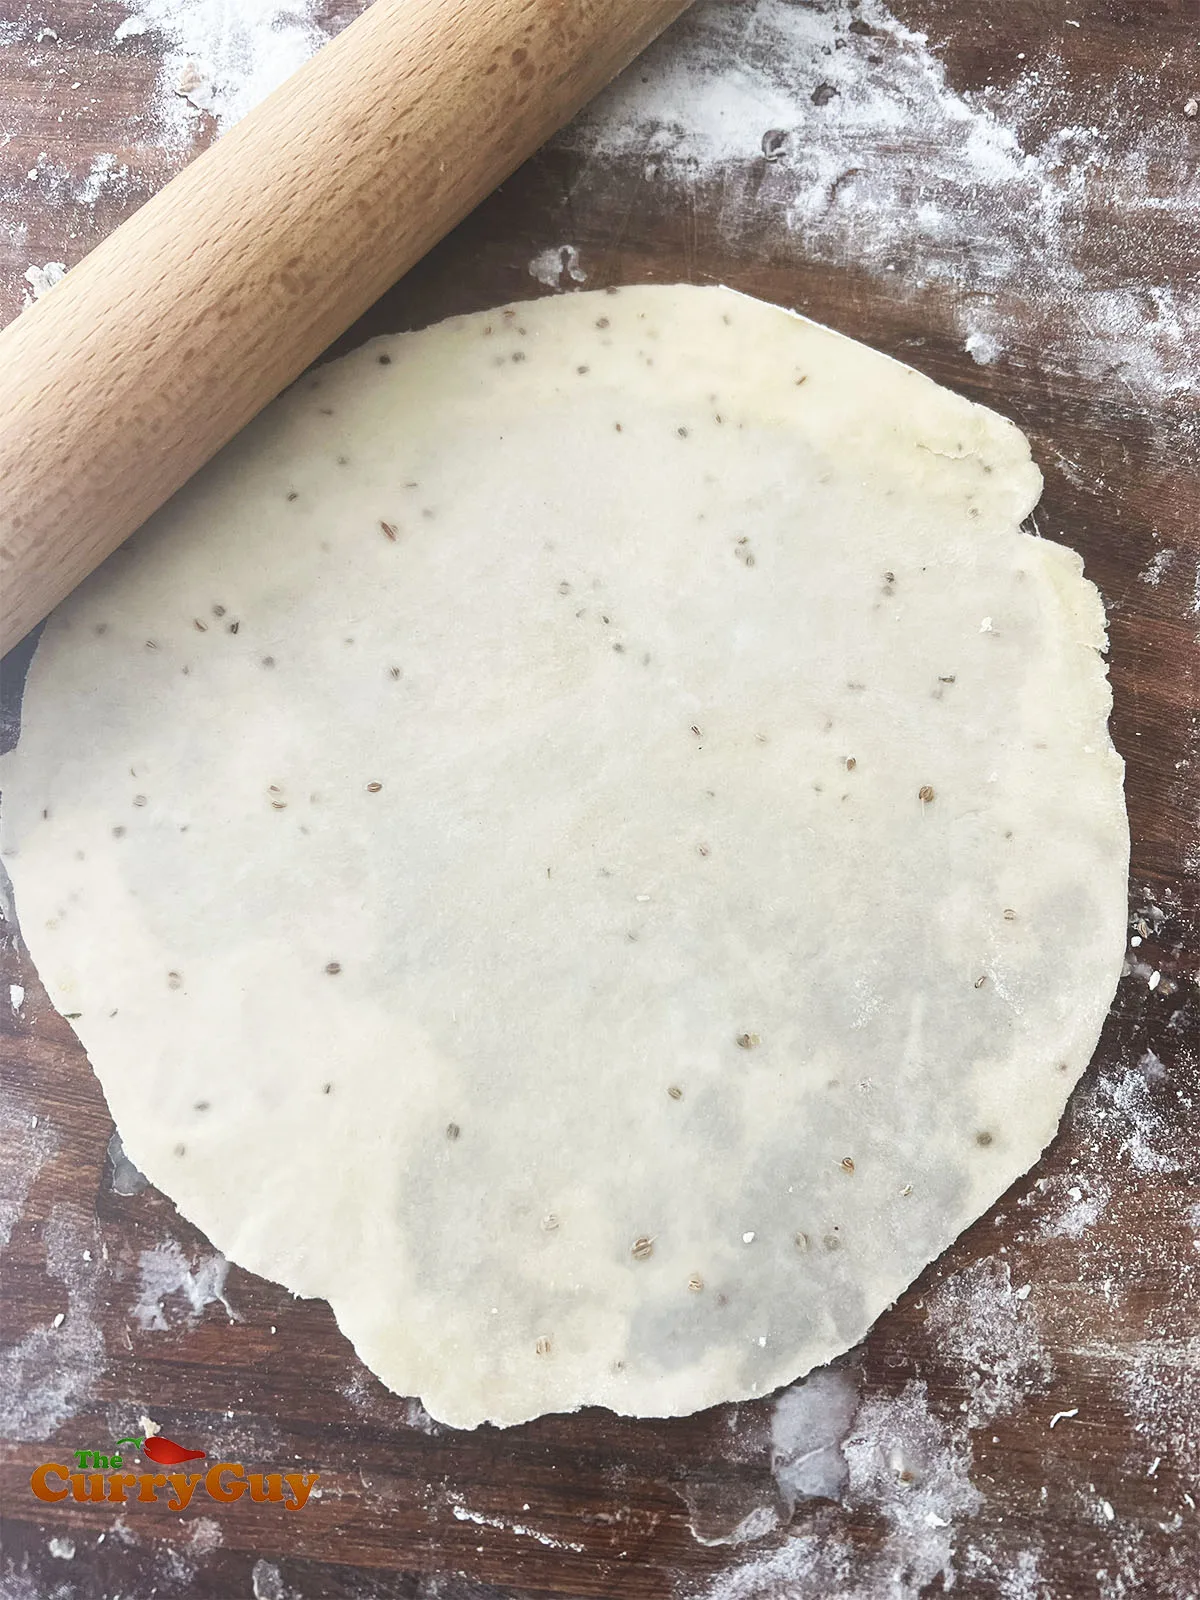 Rolling the pastry out into a round samosa wrapper.